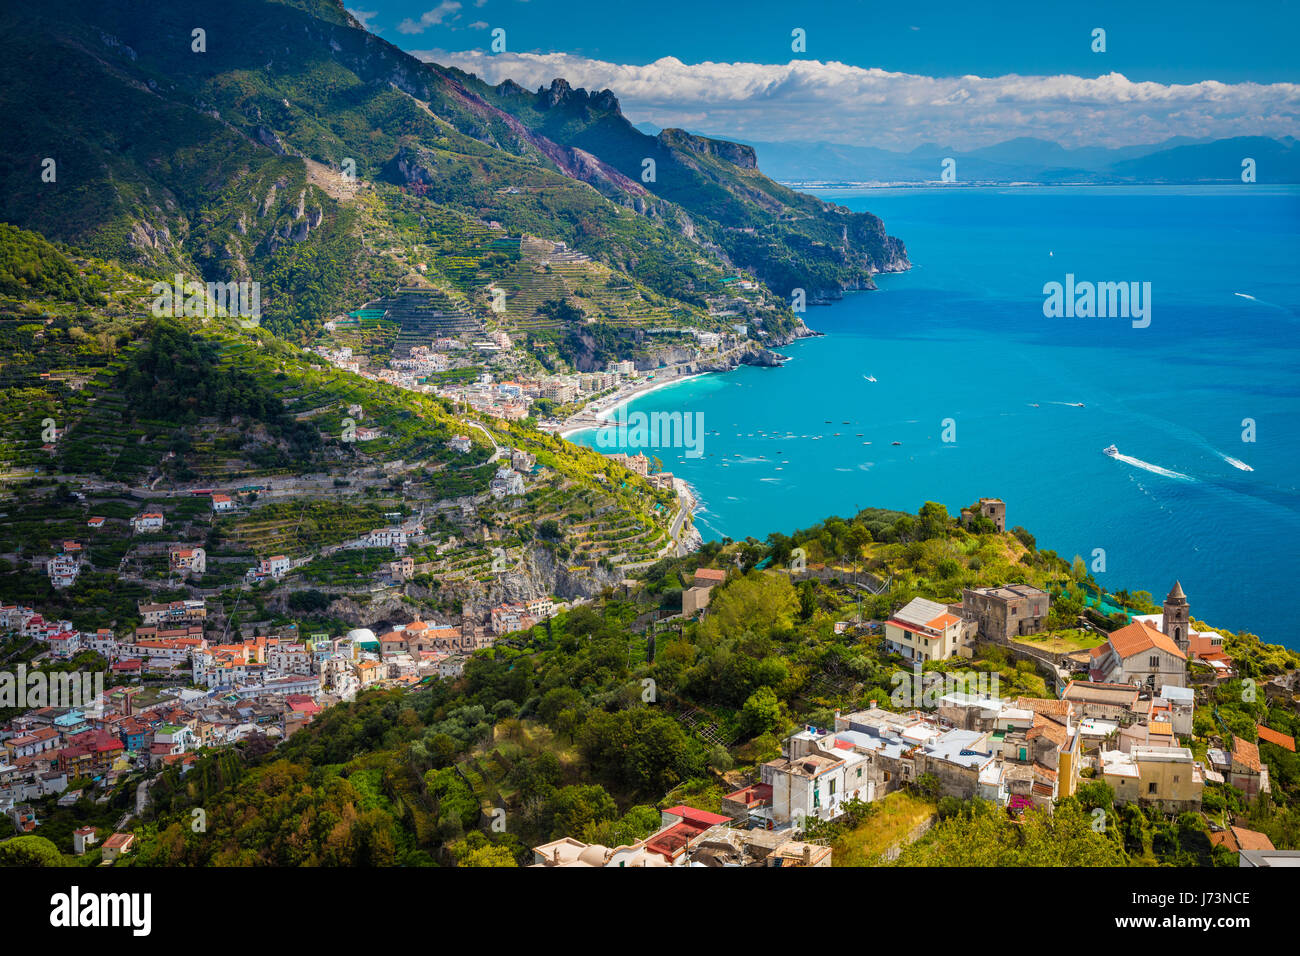 Ravello is a town and comune situated above the Amalfi Coast in the province of Salerno, Campania, southern Italy, with approximately 2,500 inhabitant Stock Photo